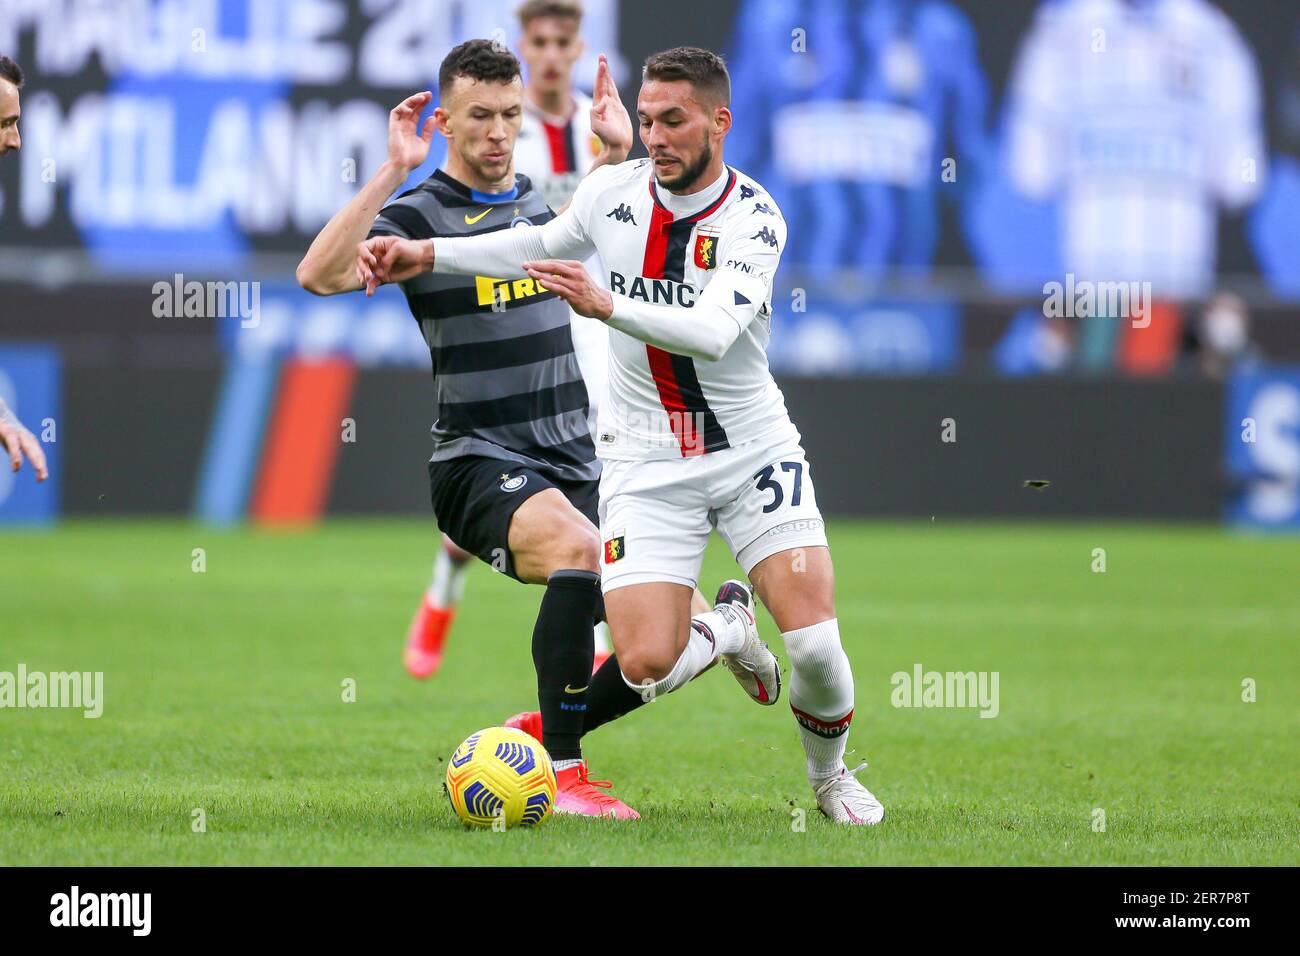 MILAN, ITALY - FEBRUARY 28: Ivan Perisic of Internazionale, Marko Pjaca of Geoa during the Serie A match between Internazionale and Genoa at San Siro Stadium on February 28, 2021 in Milan, Italy (Photo by Ciro Santangelo/Orange Pictures) Stock Photo